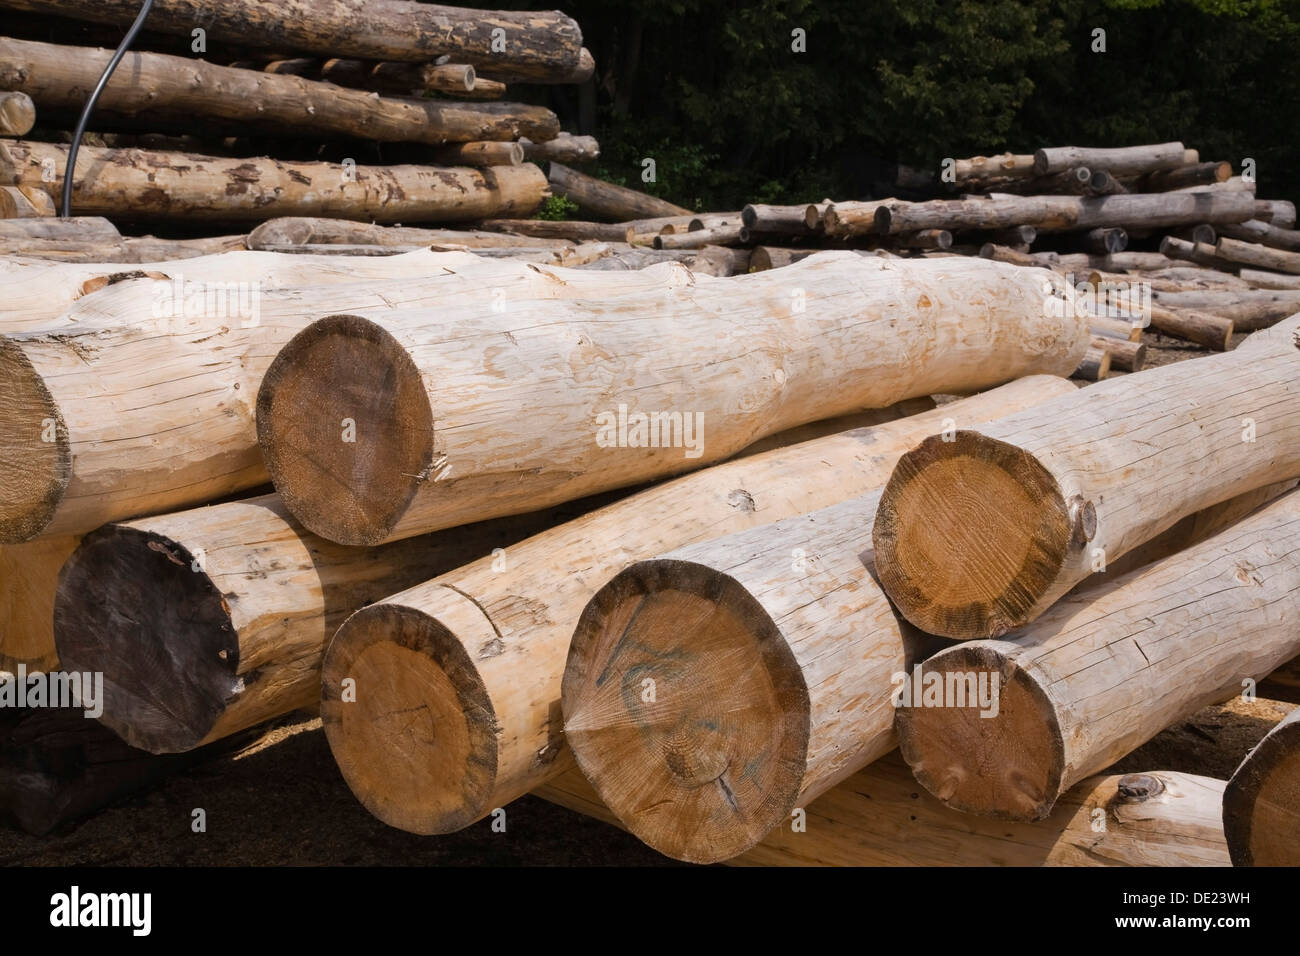 Stack of Eastern white pine tree logs, Laurentians, Quebec, Canada Stock Photo